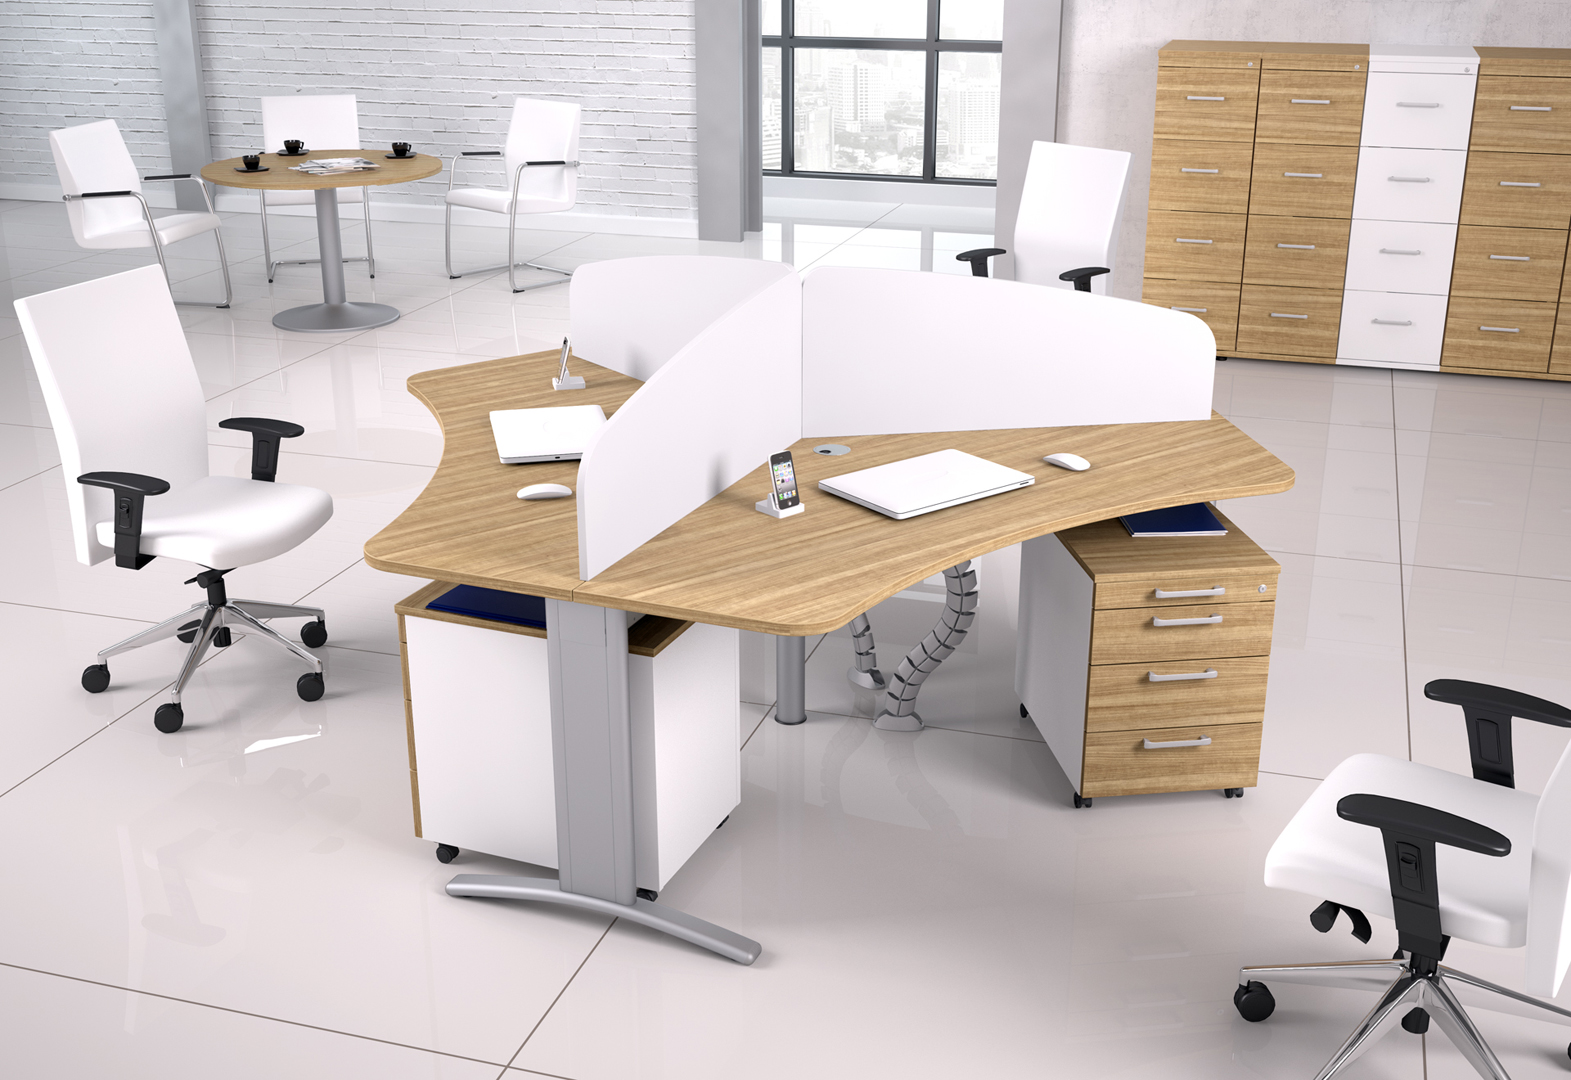 Peace of Mind: Prioritizing Warranty and Support When Selecting Office Furniture